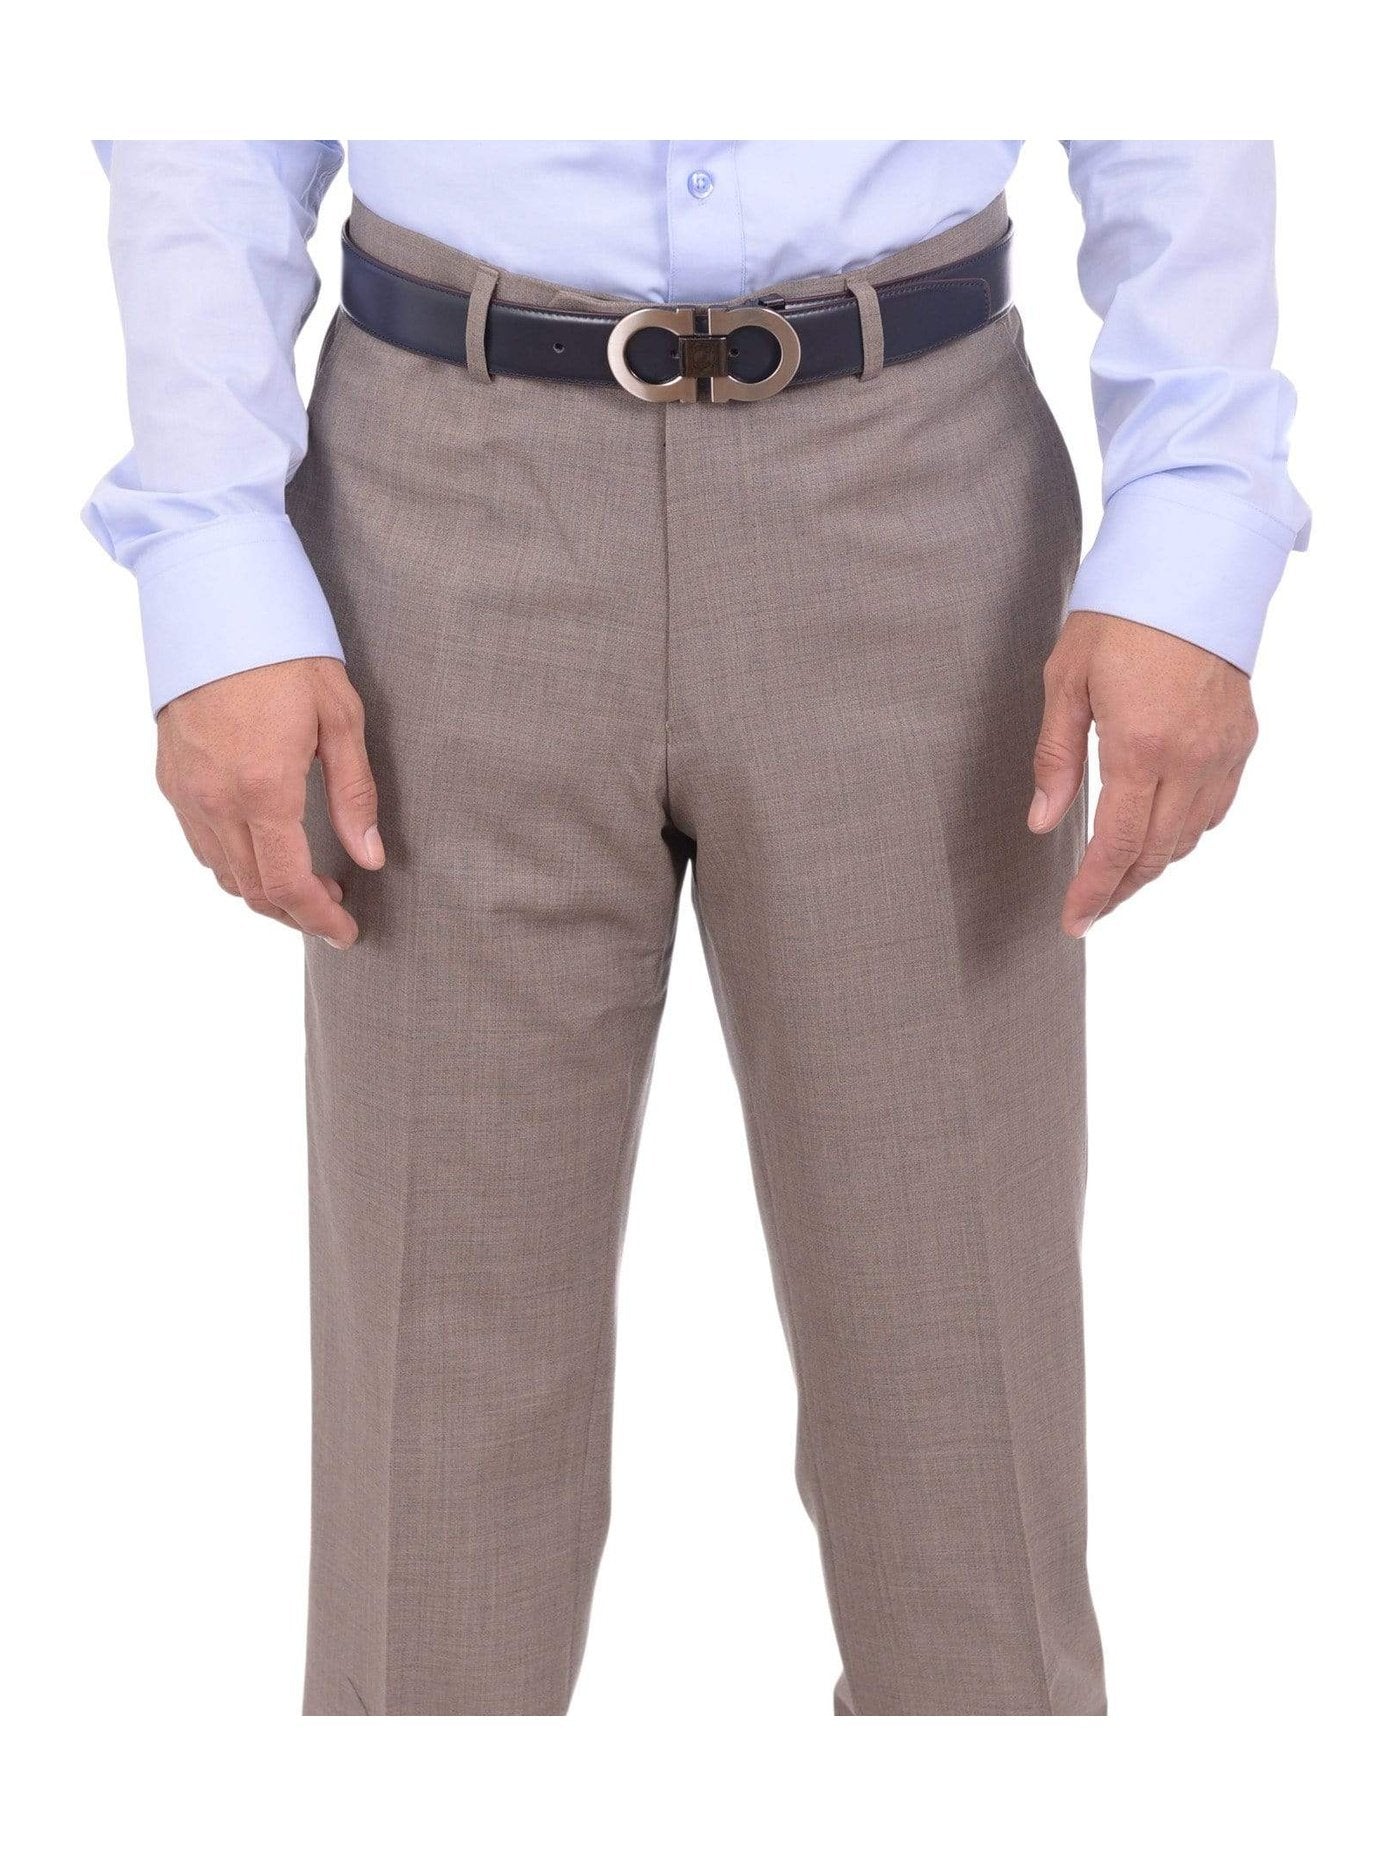 Buy Blackerrys Mens Textured Beige Trousers at Amazon.in